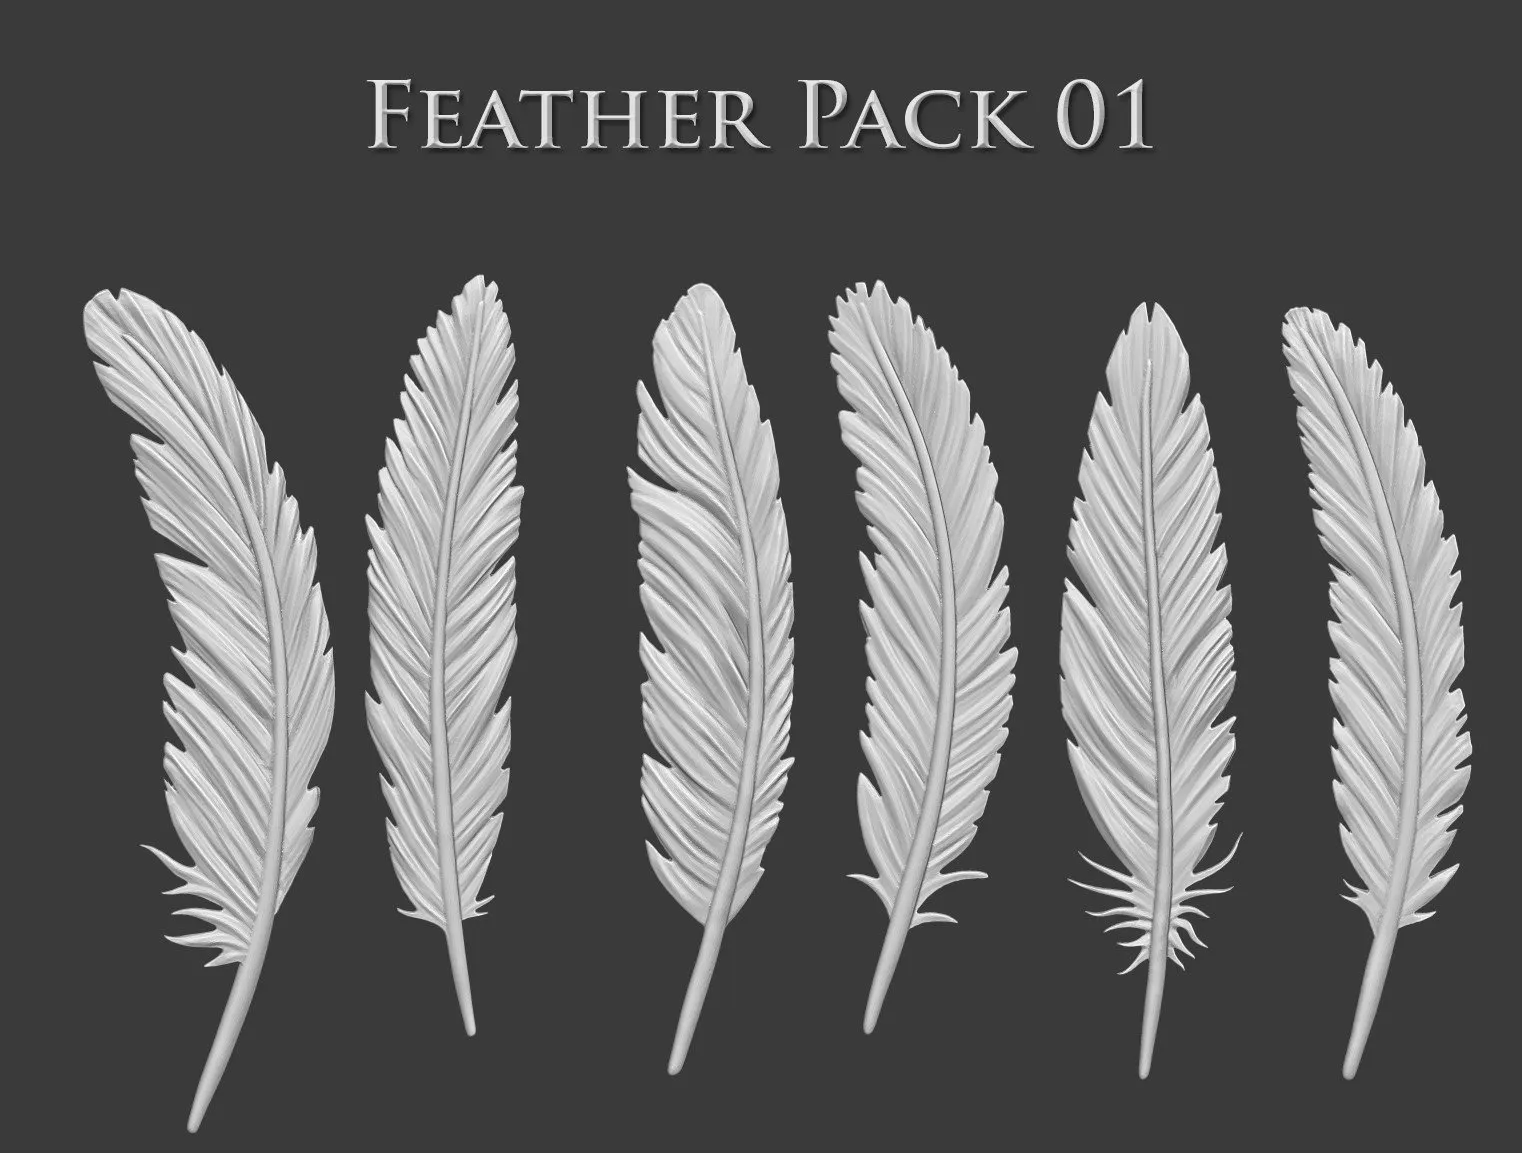 A picture of 3D feathers in a row